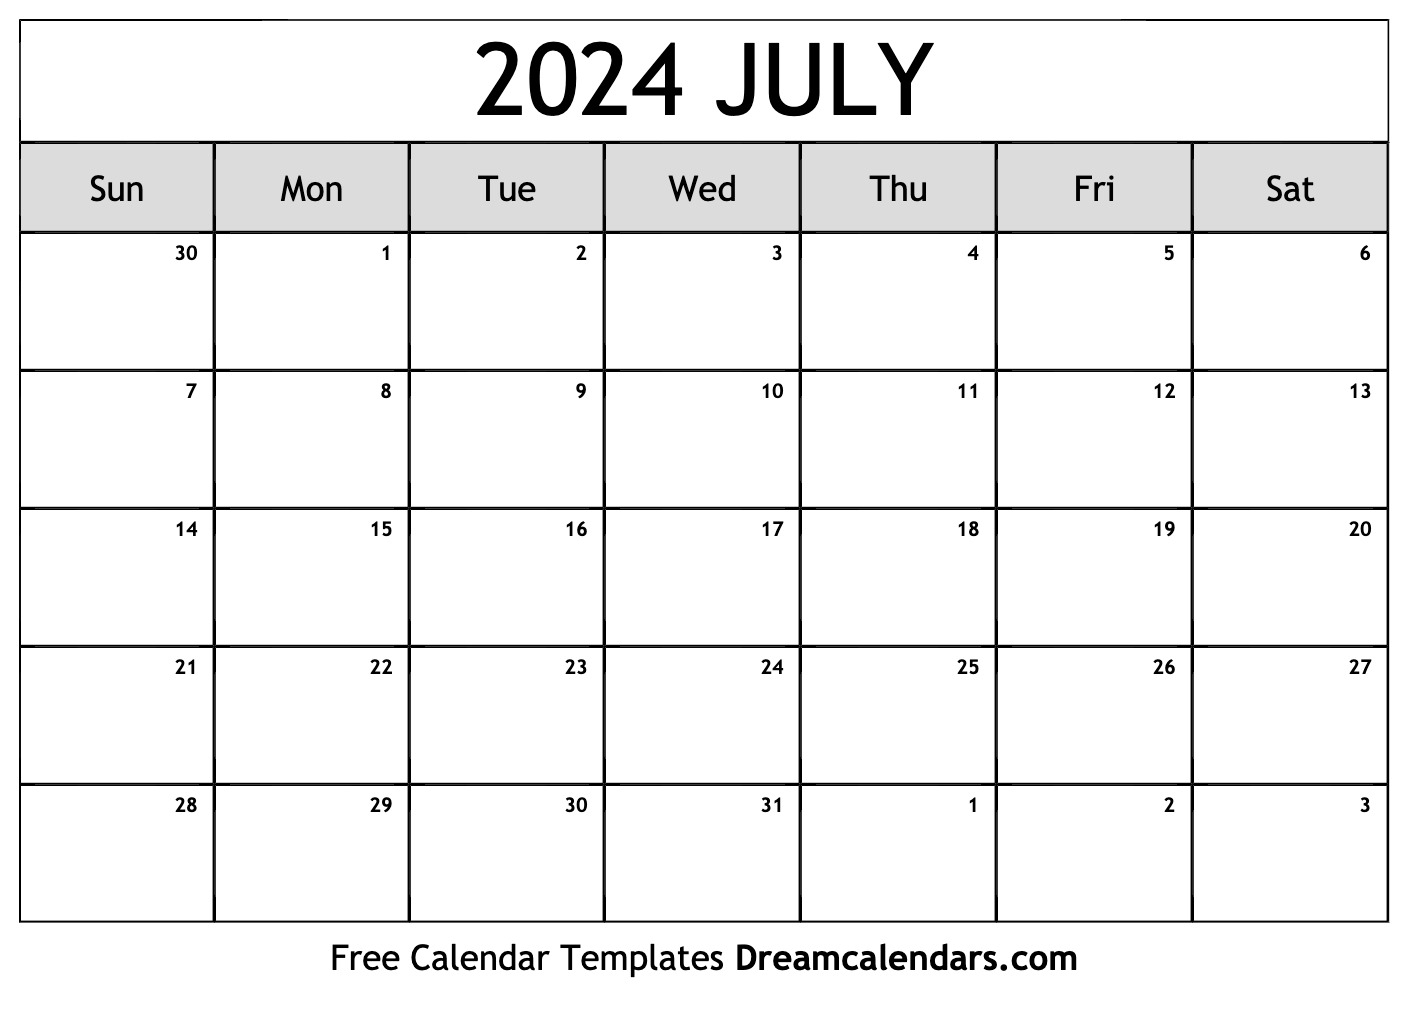 July 2024 Calendar | Free Blank Printable With Holidays for Blank Calendar Template July 2024 Printable